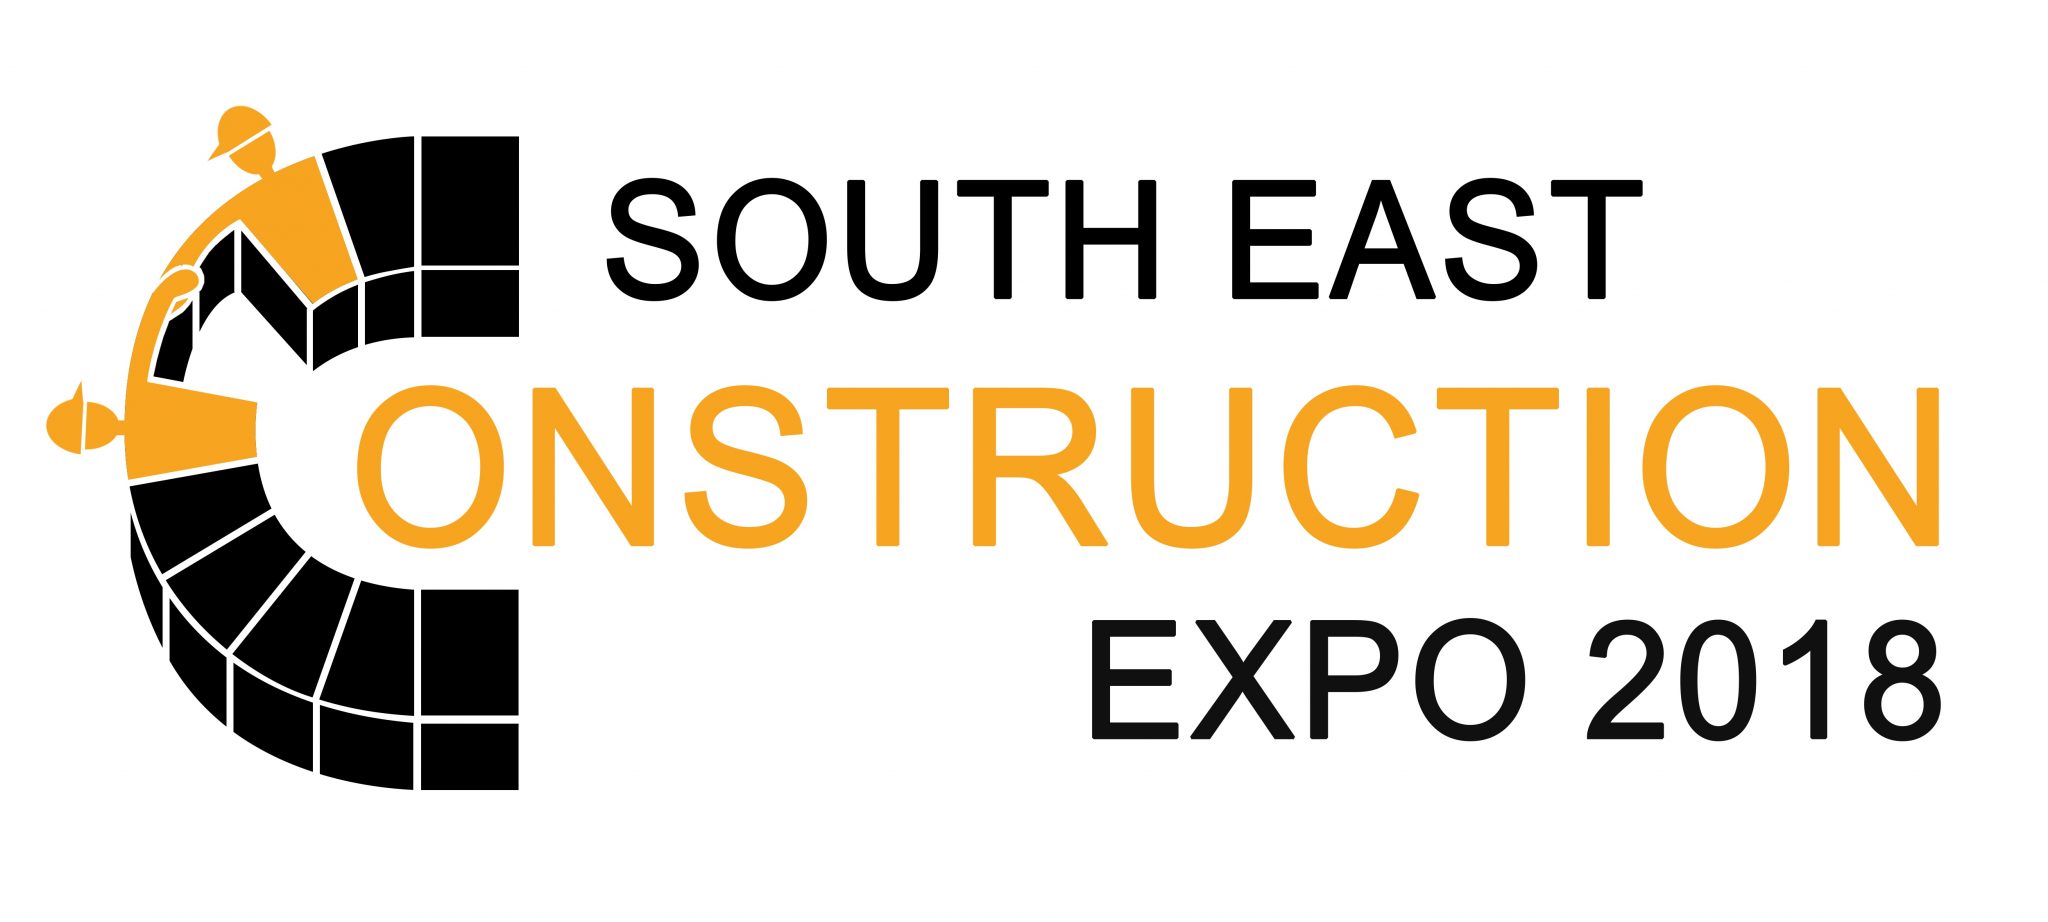 The future of the construction industry; South East Construction Expo 2018 offered exciting new insights @ConstructExpo